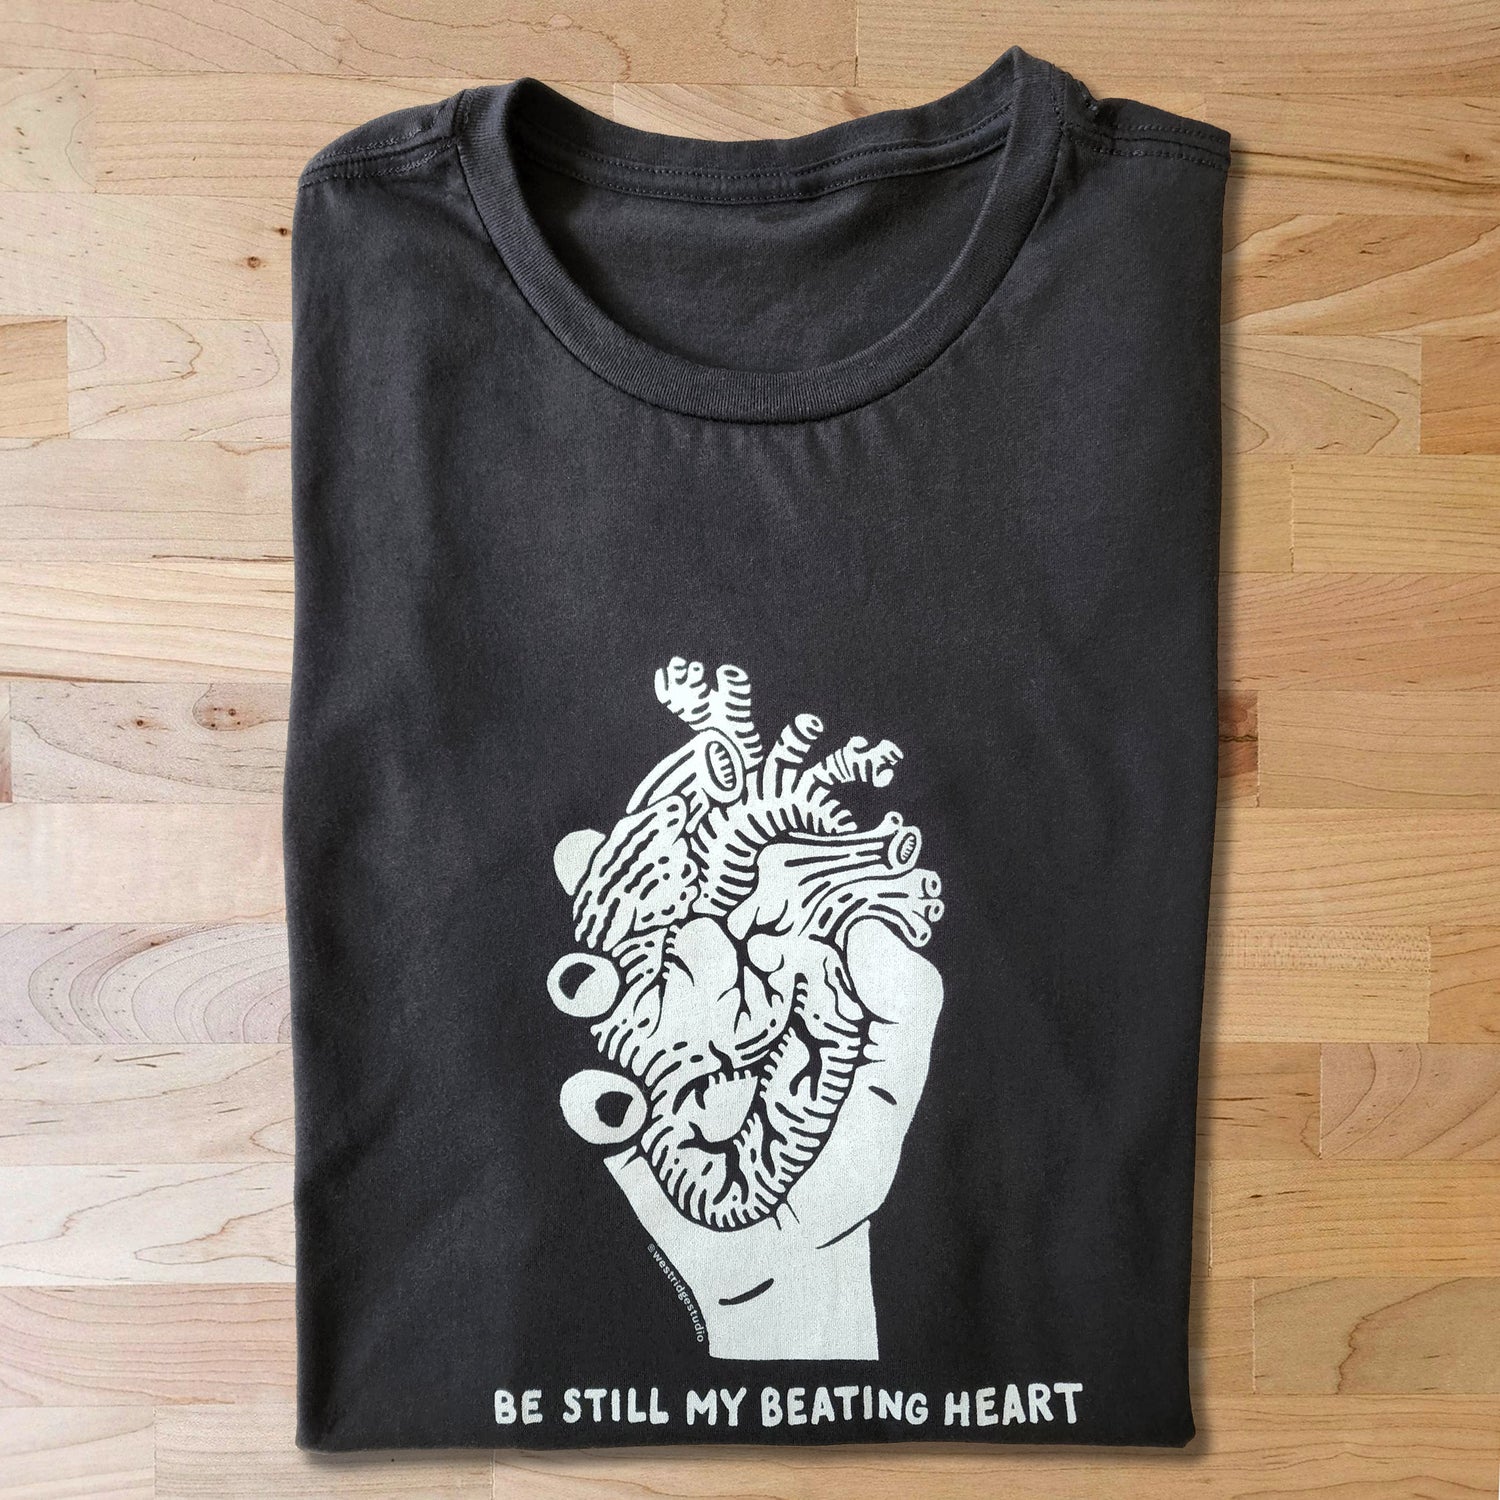 Be Still My Beating Heart graphic black t-shirt for women